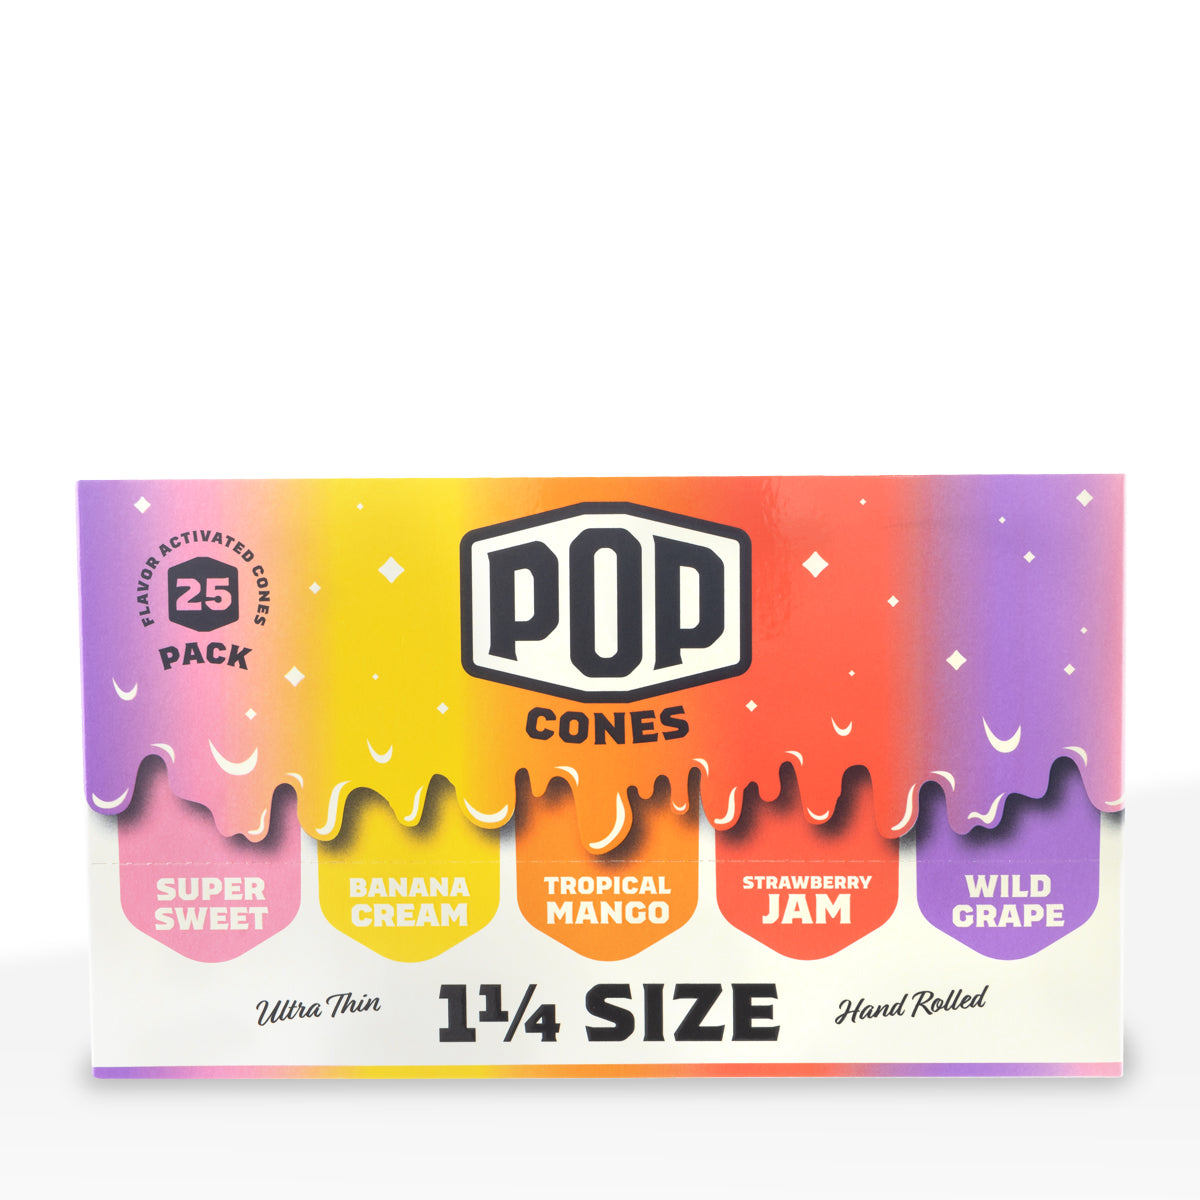 Pop Cones | Pre-Rolled Cones 1¼ Size | 84mm - Assorted Flavors - 6 Pack 25 Count - Ultra Thin